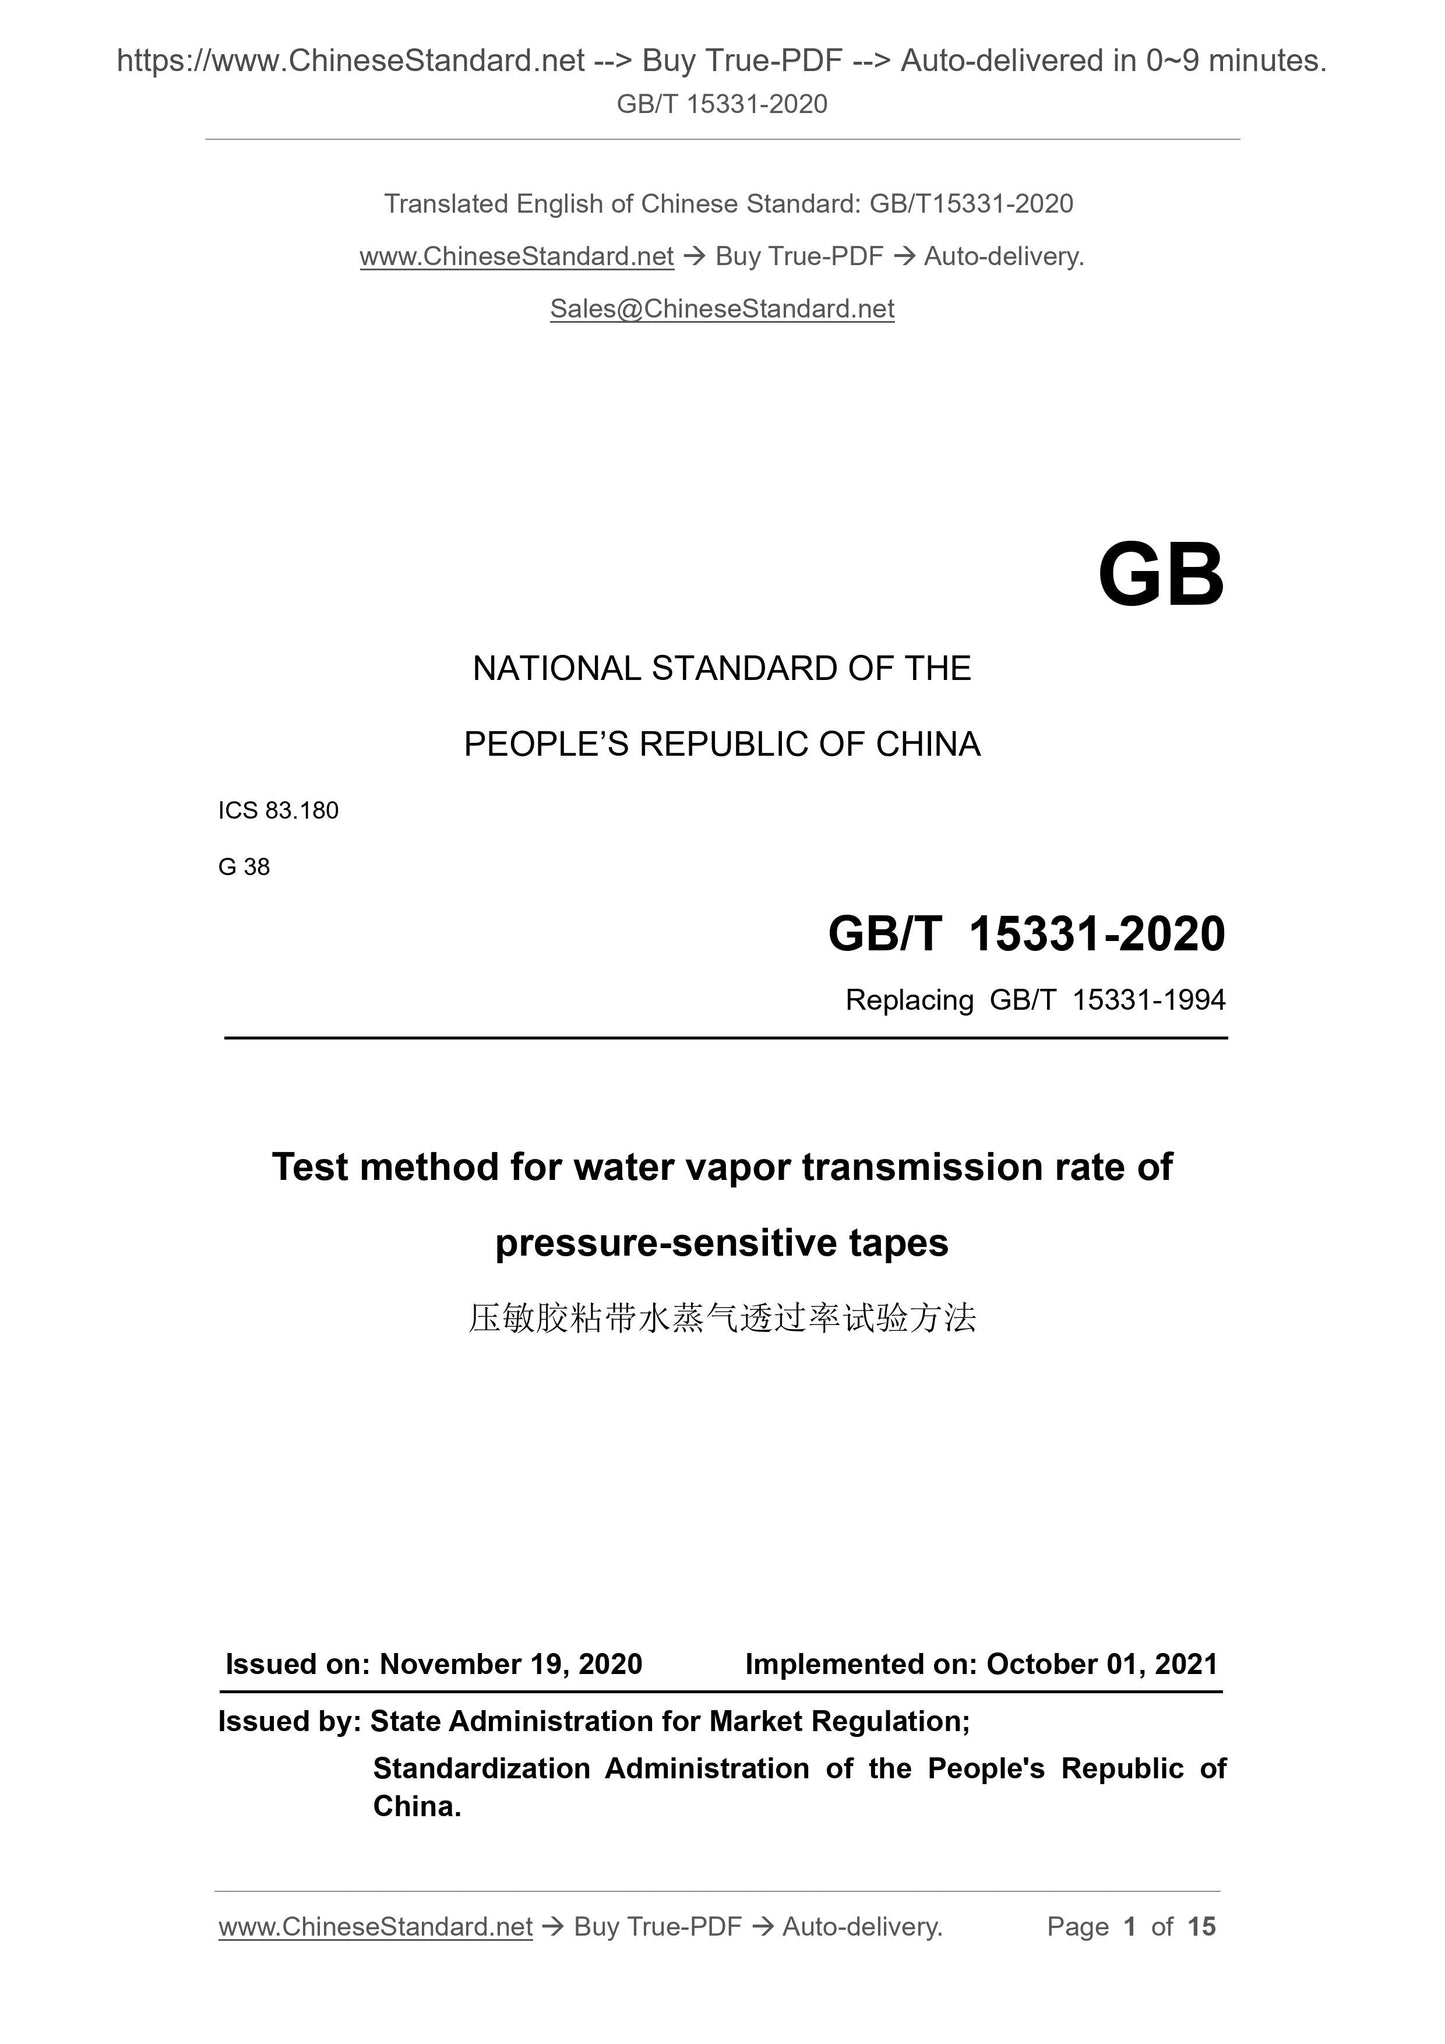 GB/T 15331-2020 Page 1